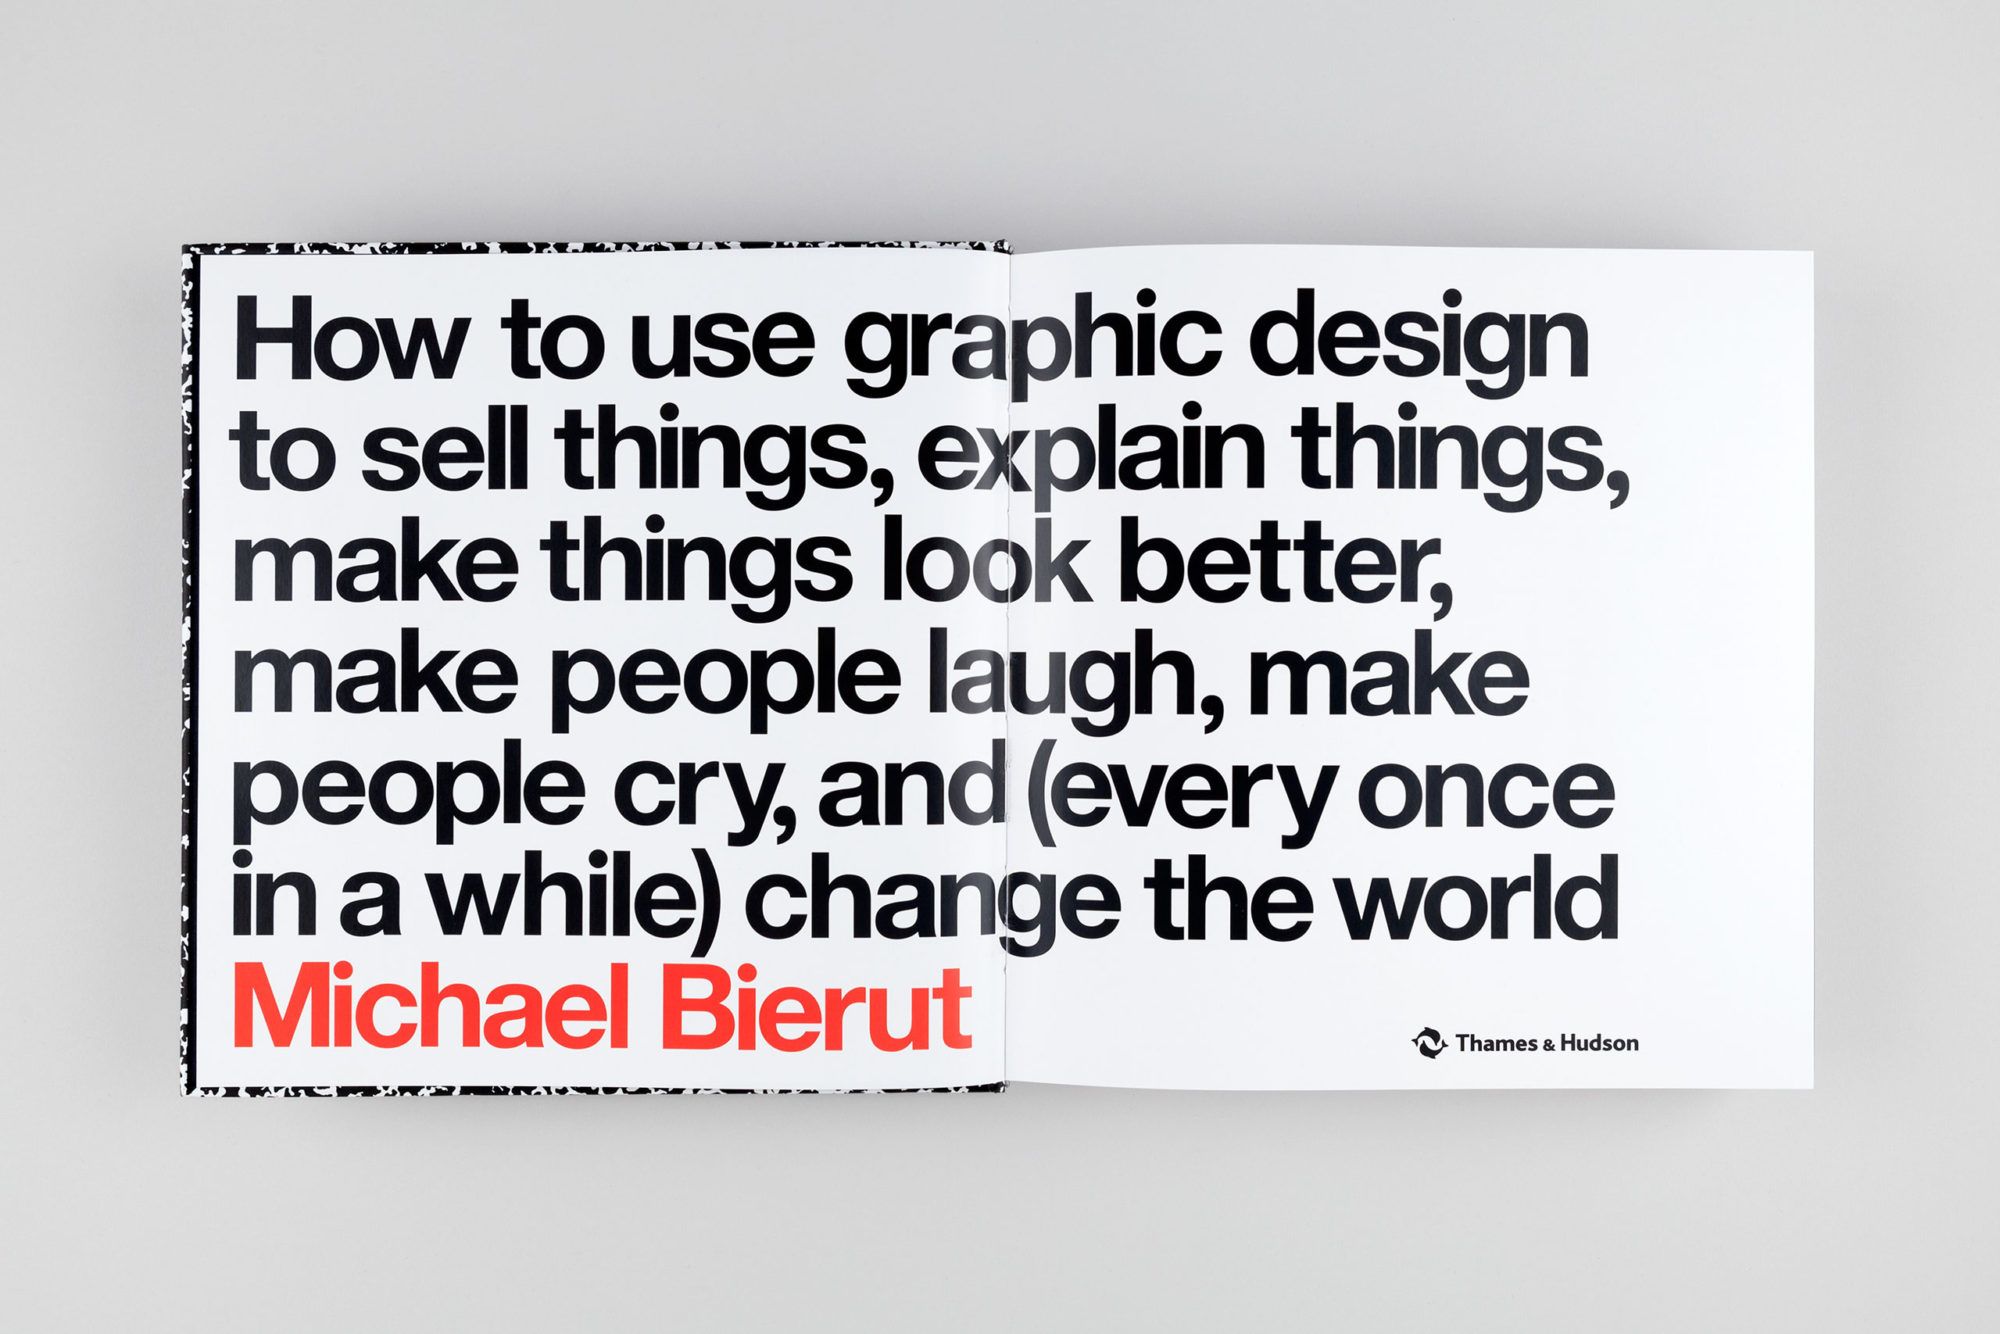 How To Use Graphic Design To Sell Things, Explain Things, Make Things Look Better, Make People Laugh